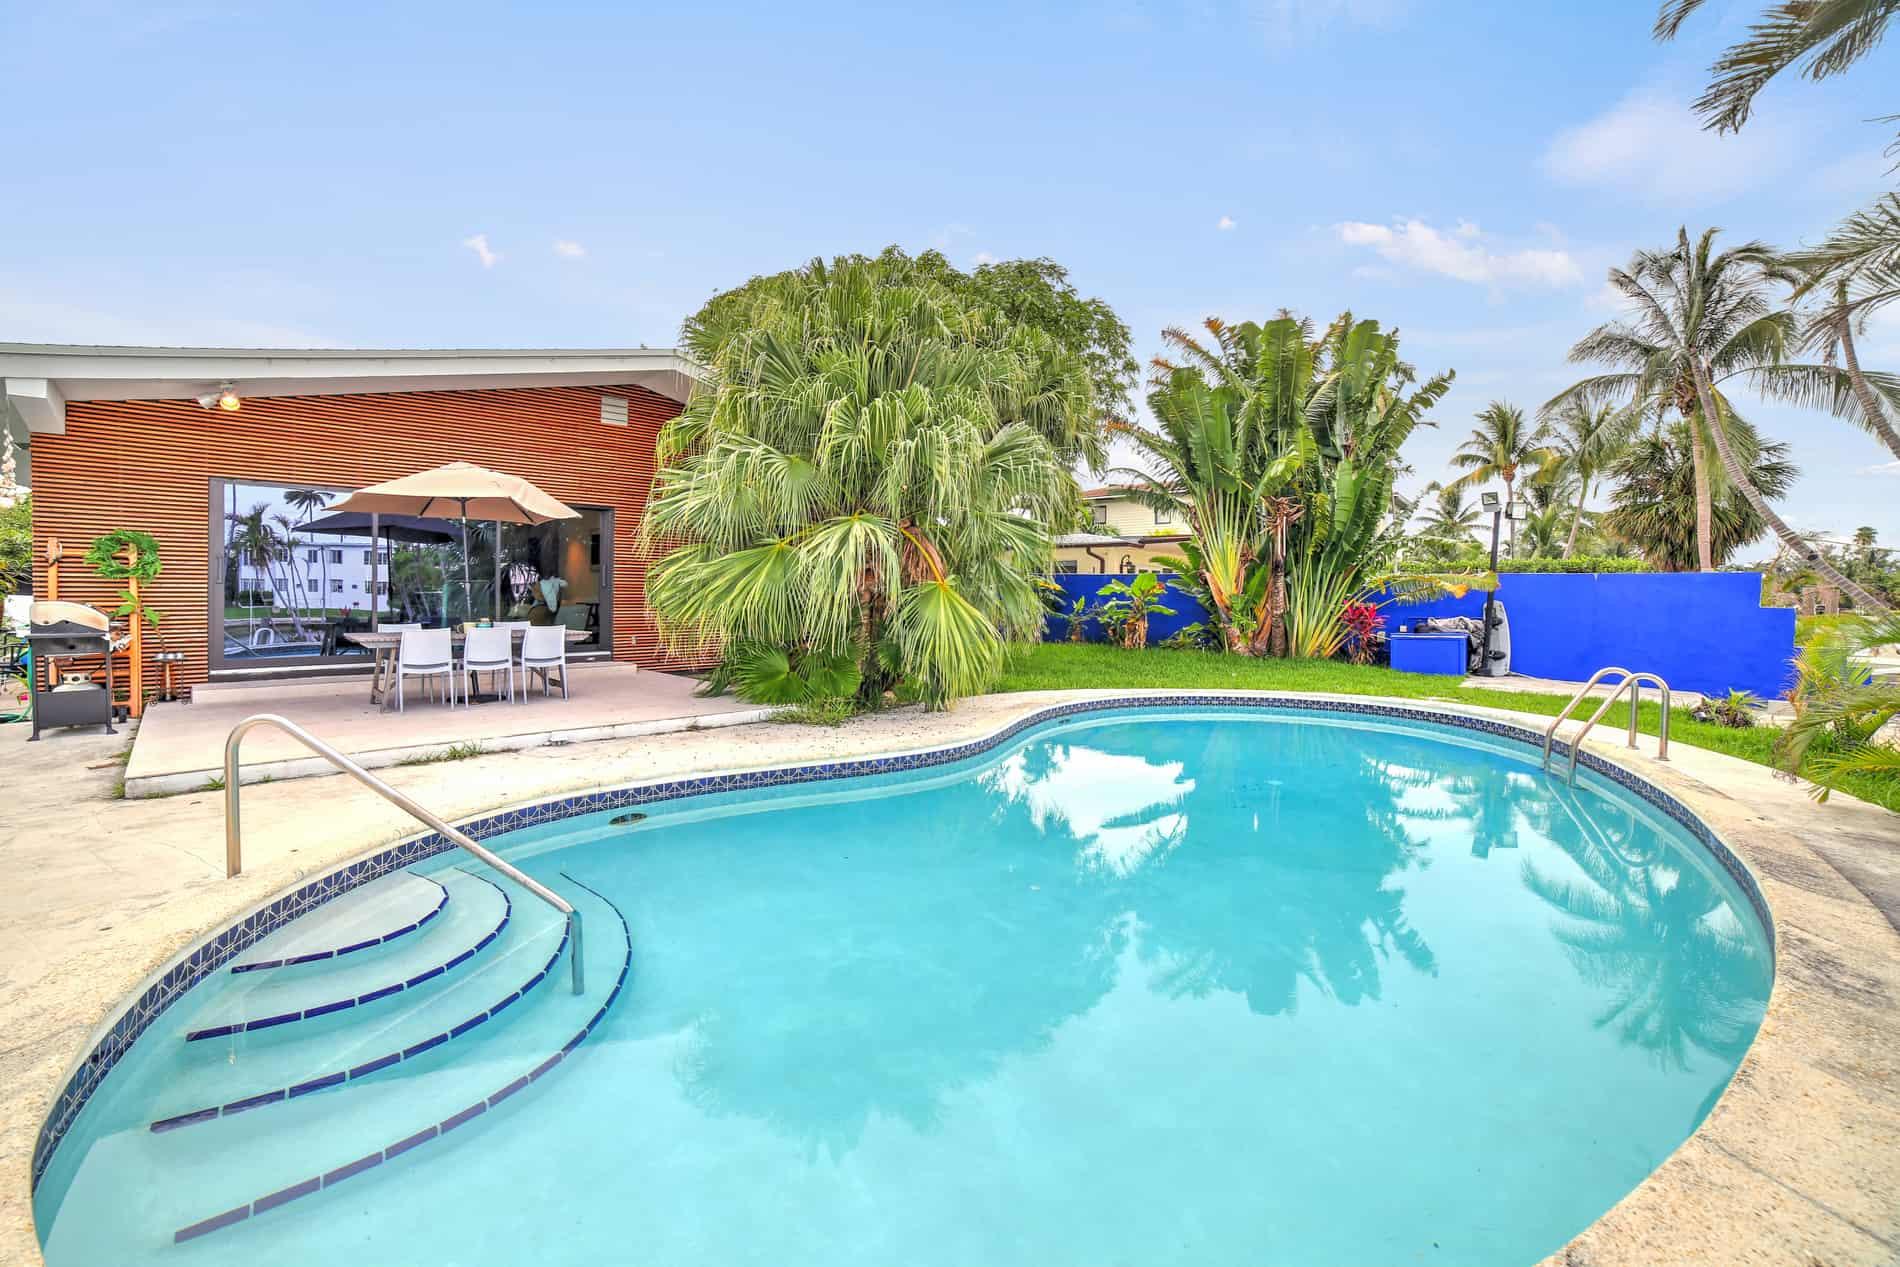 Miami Beach Waterfront House For Sale: 4 Bedrooms - Swimming Pool - Indoor Garage